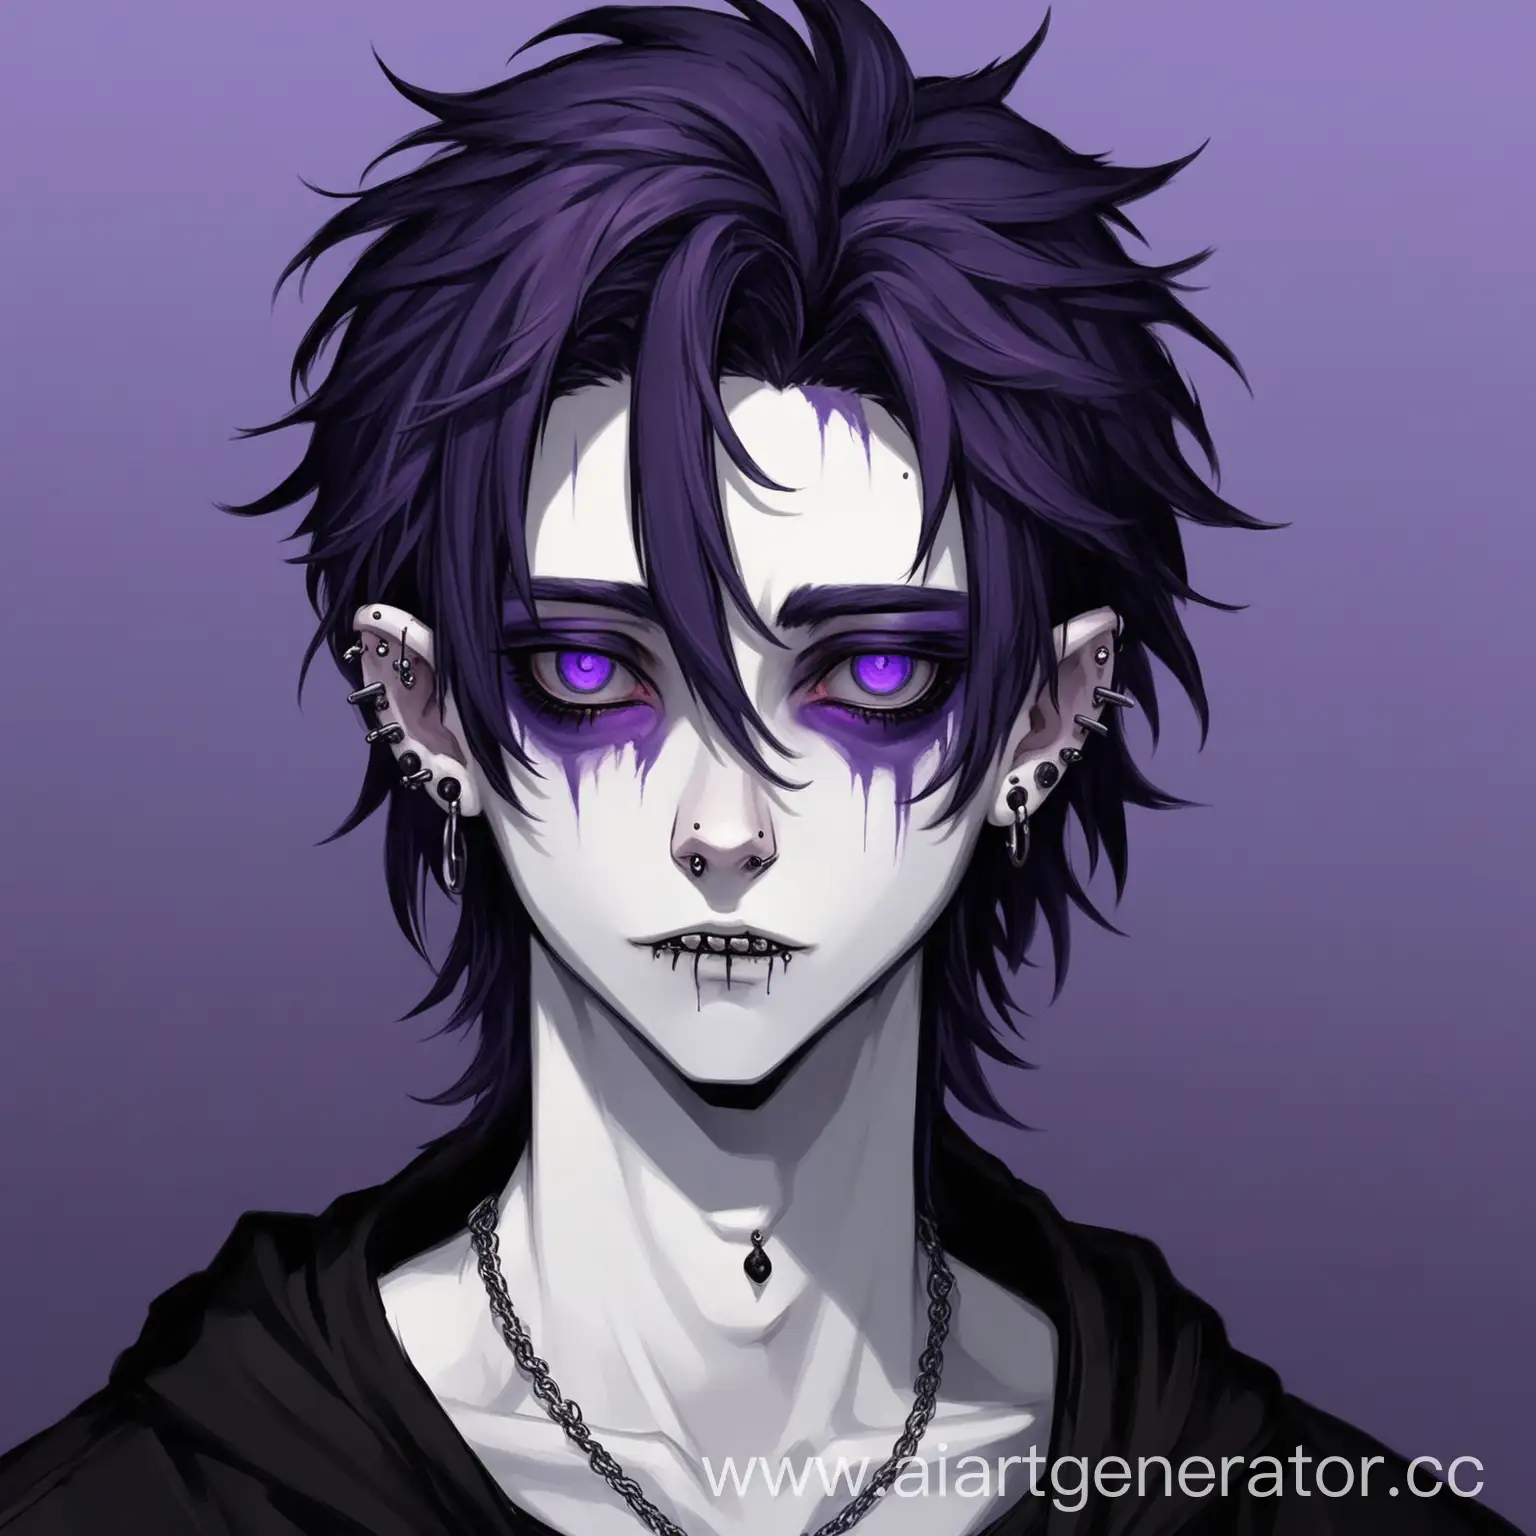 Colt is a young man aged 20-24 with a slim build and long, possibly slightly messy hair. He has pale skin, accentuated by purple shadows and makeup around his eyes. He has piercings in his ears.